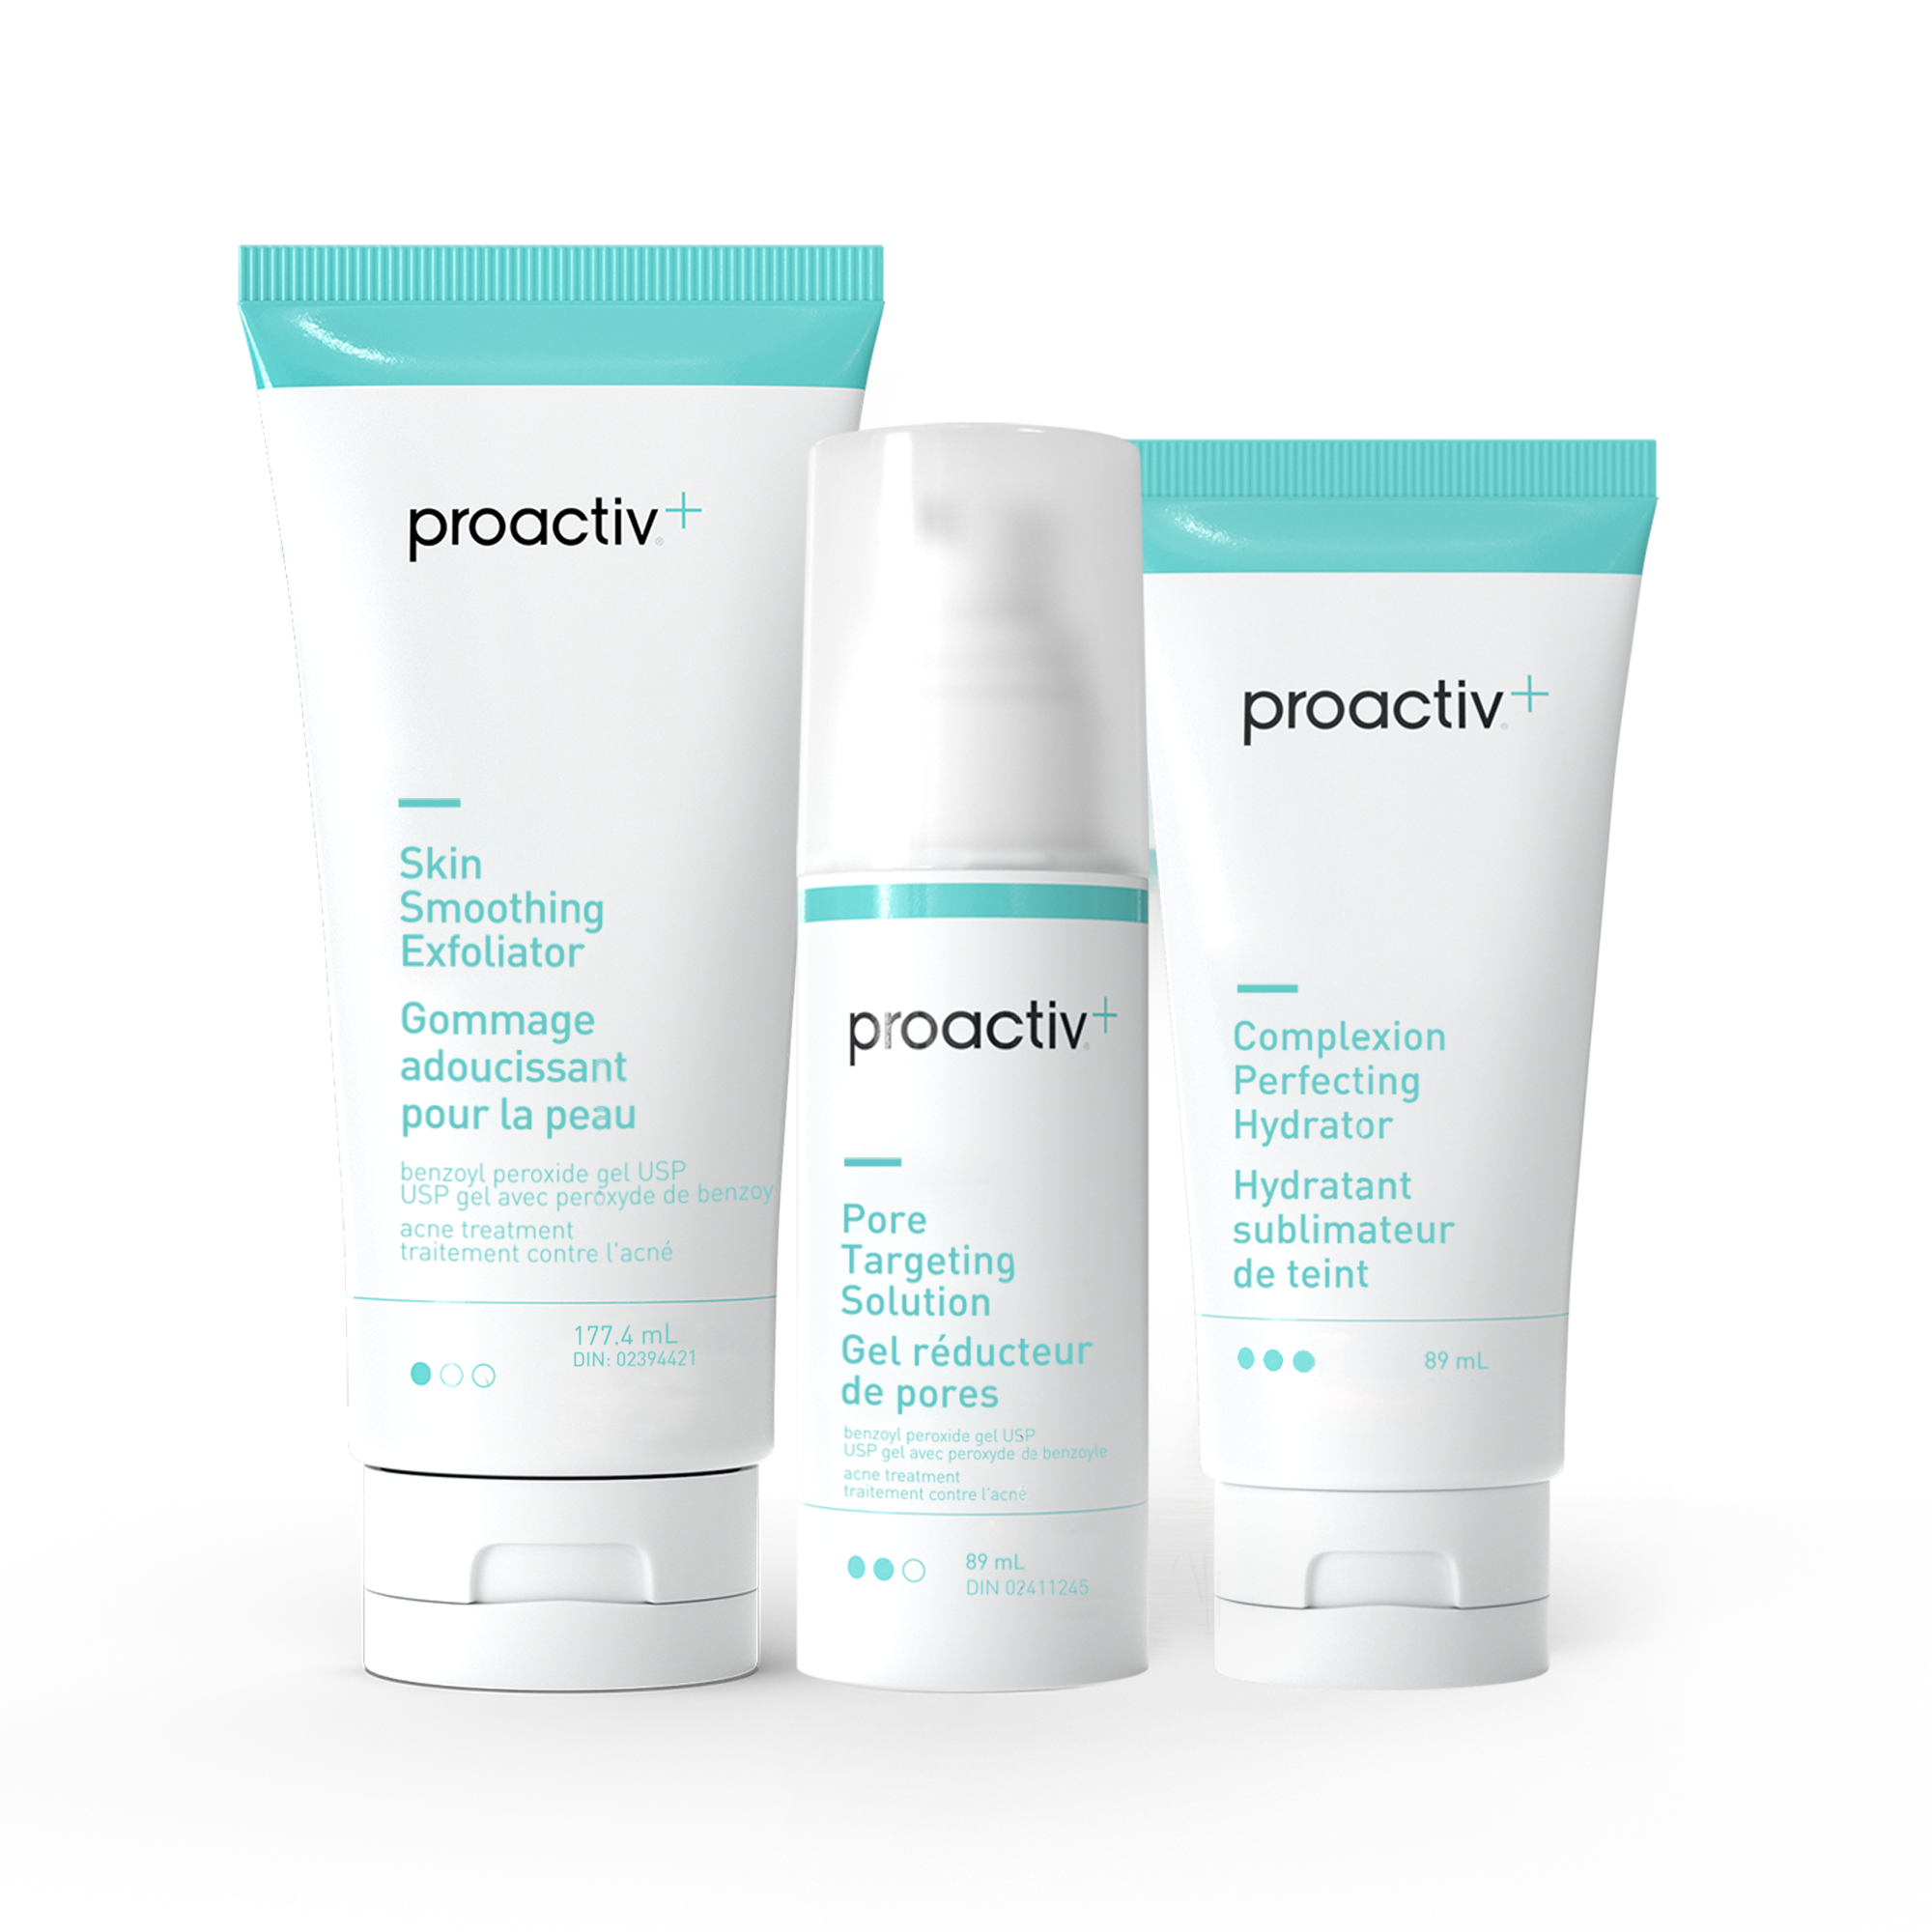 About Proactiv+ | Our Best Acne Treatment System